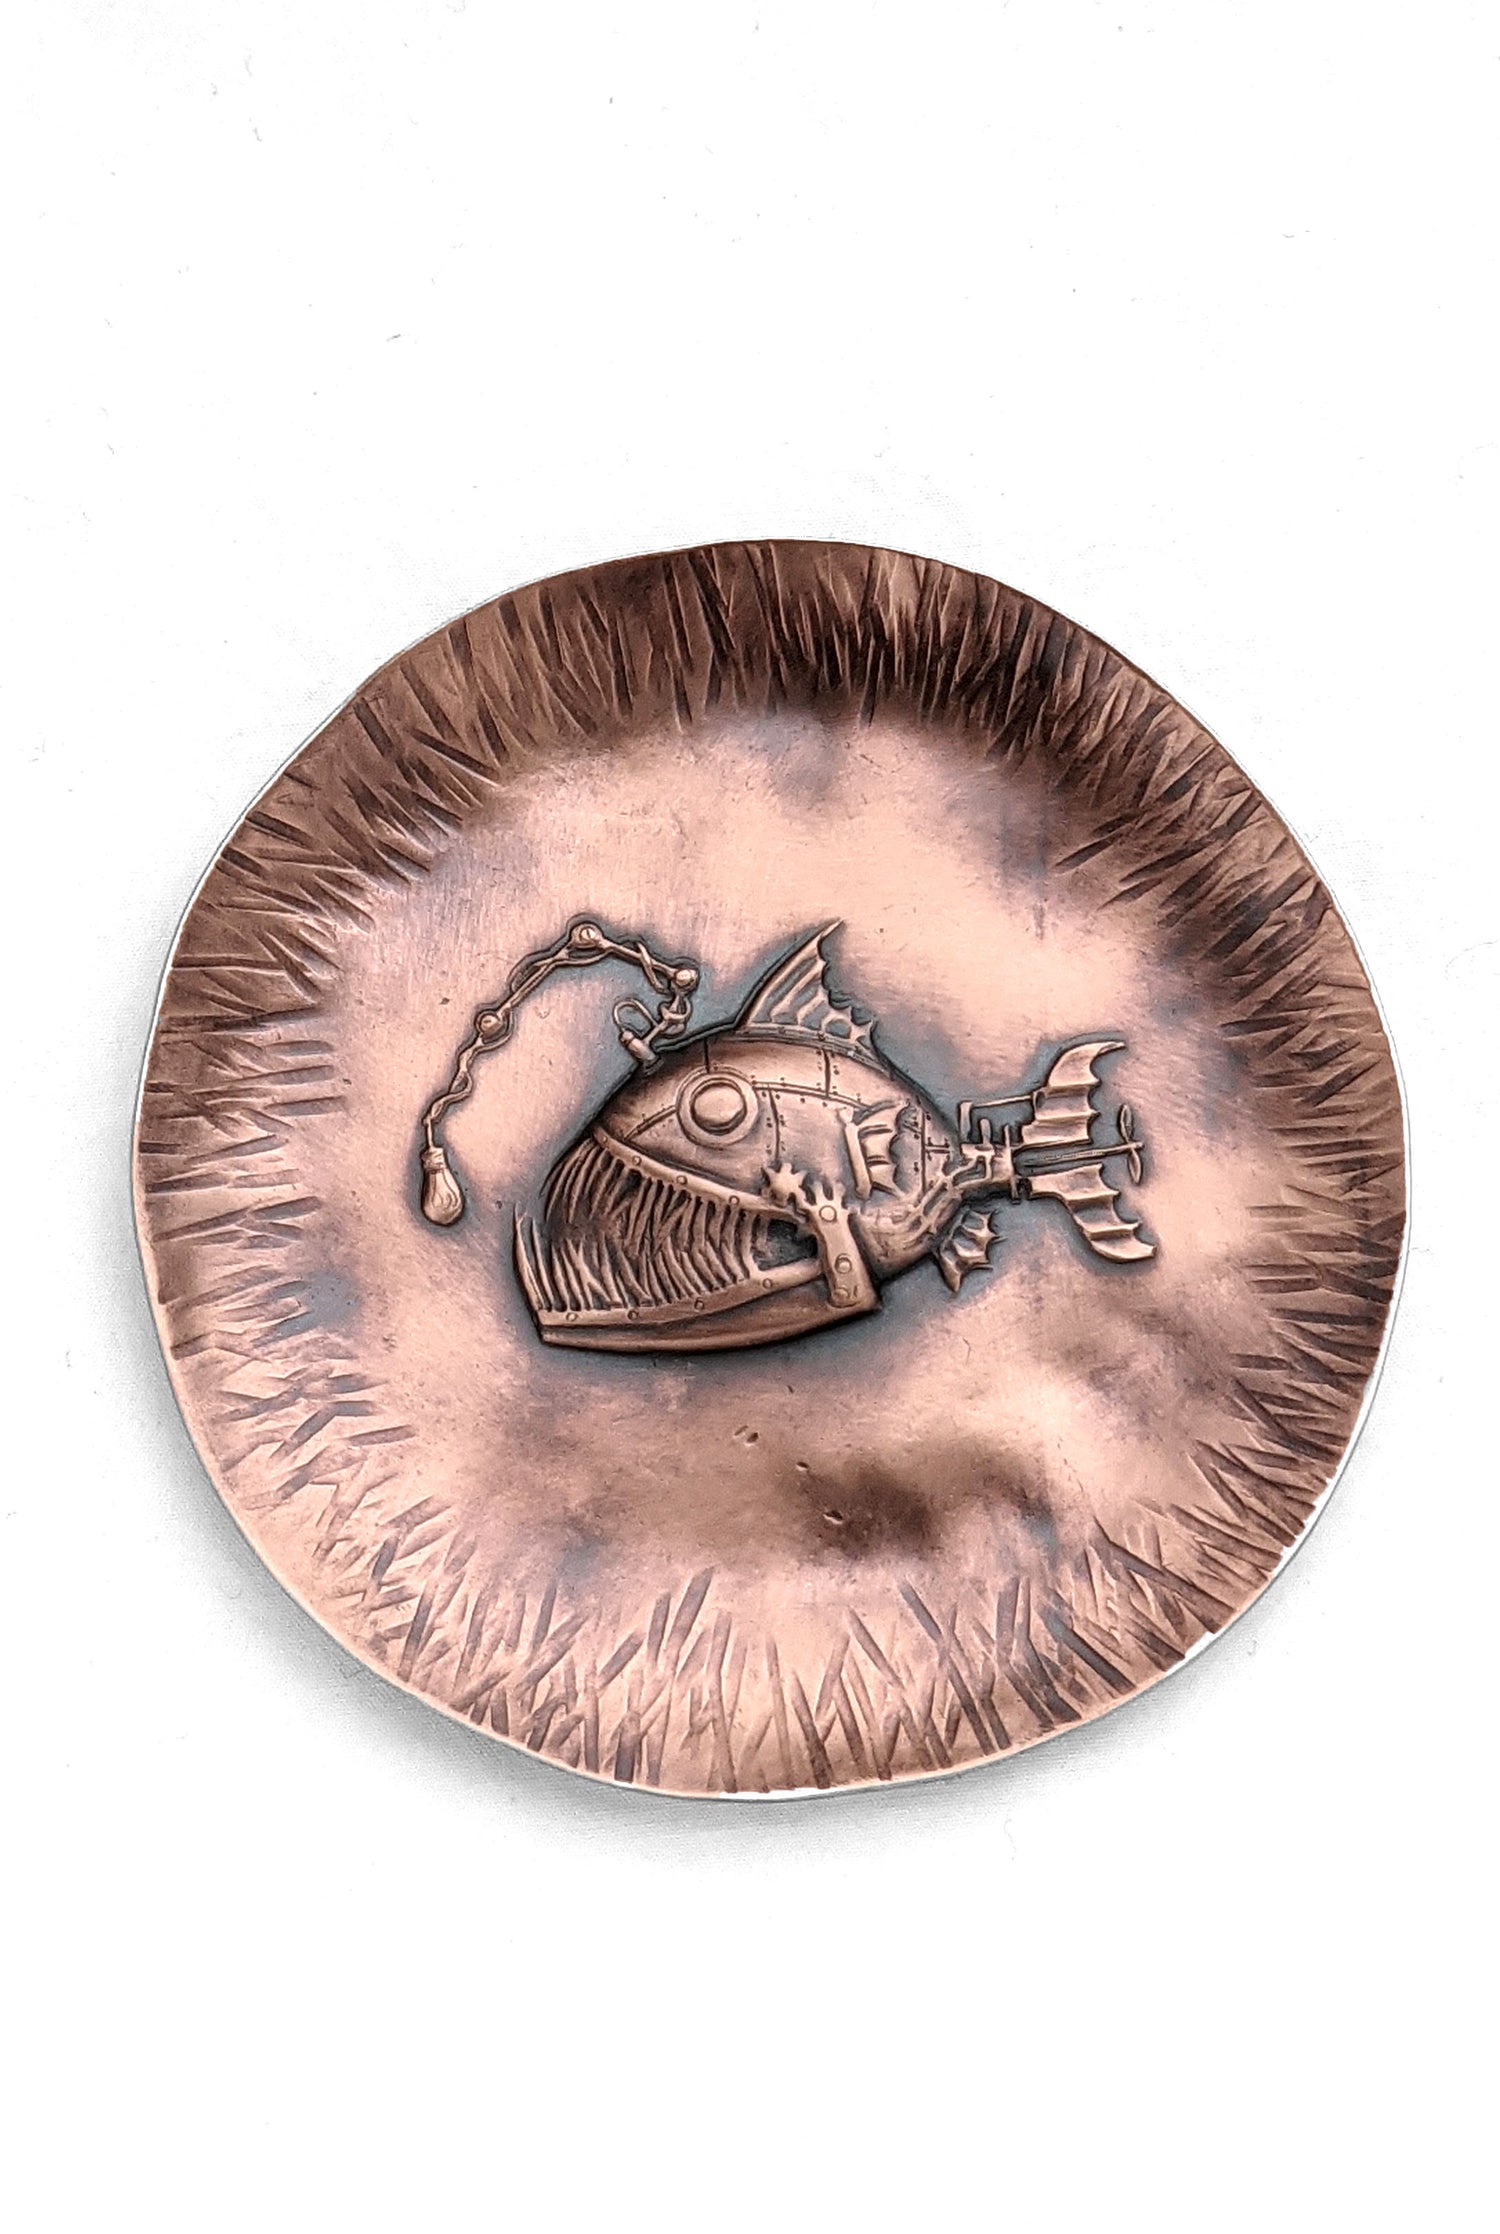 A copper dish with a raised impression of an anglerfish. This is a classic steampunk design inspired by the works of Jules Verne. The dish is used to hold rings and jewelry. The edges are slightly raised to create a bowl shape and have hammered lines design around the edges. The piece is oxidized to enhance the details.